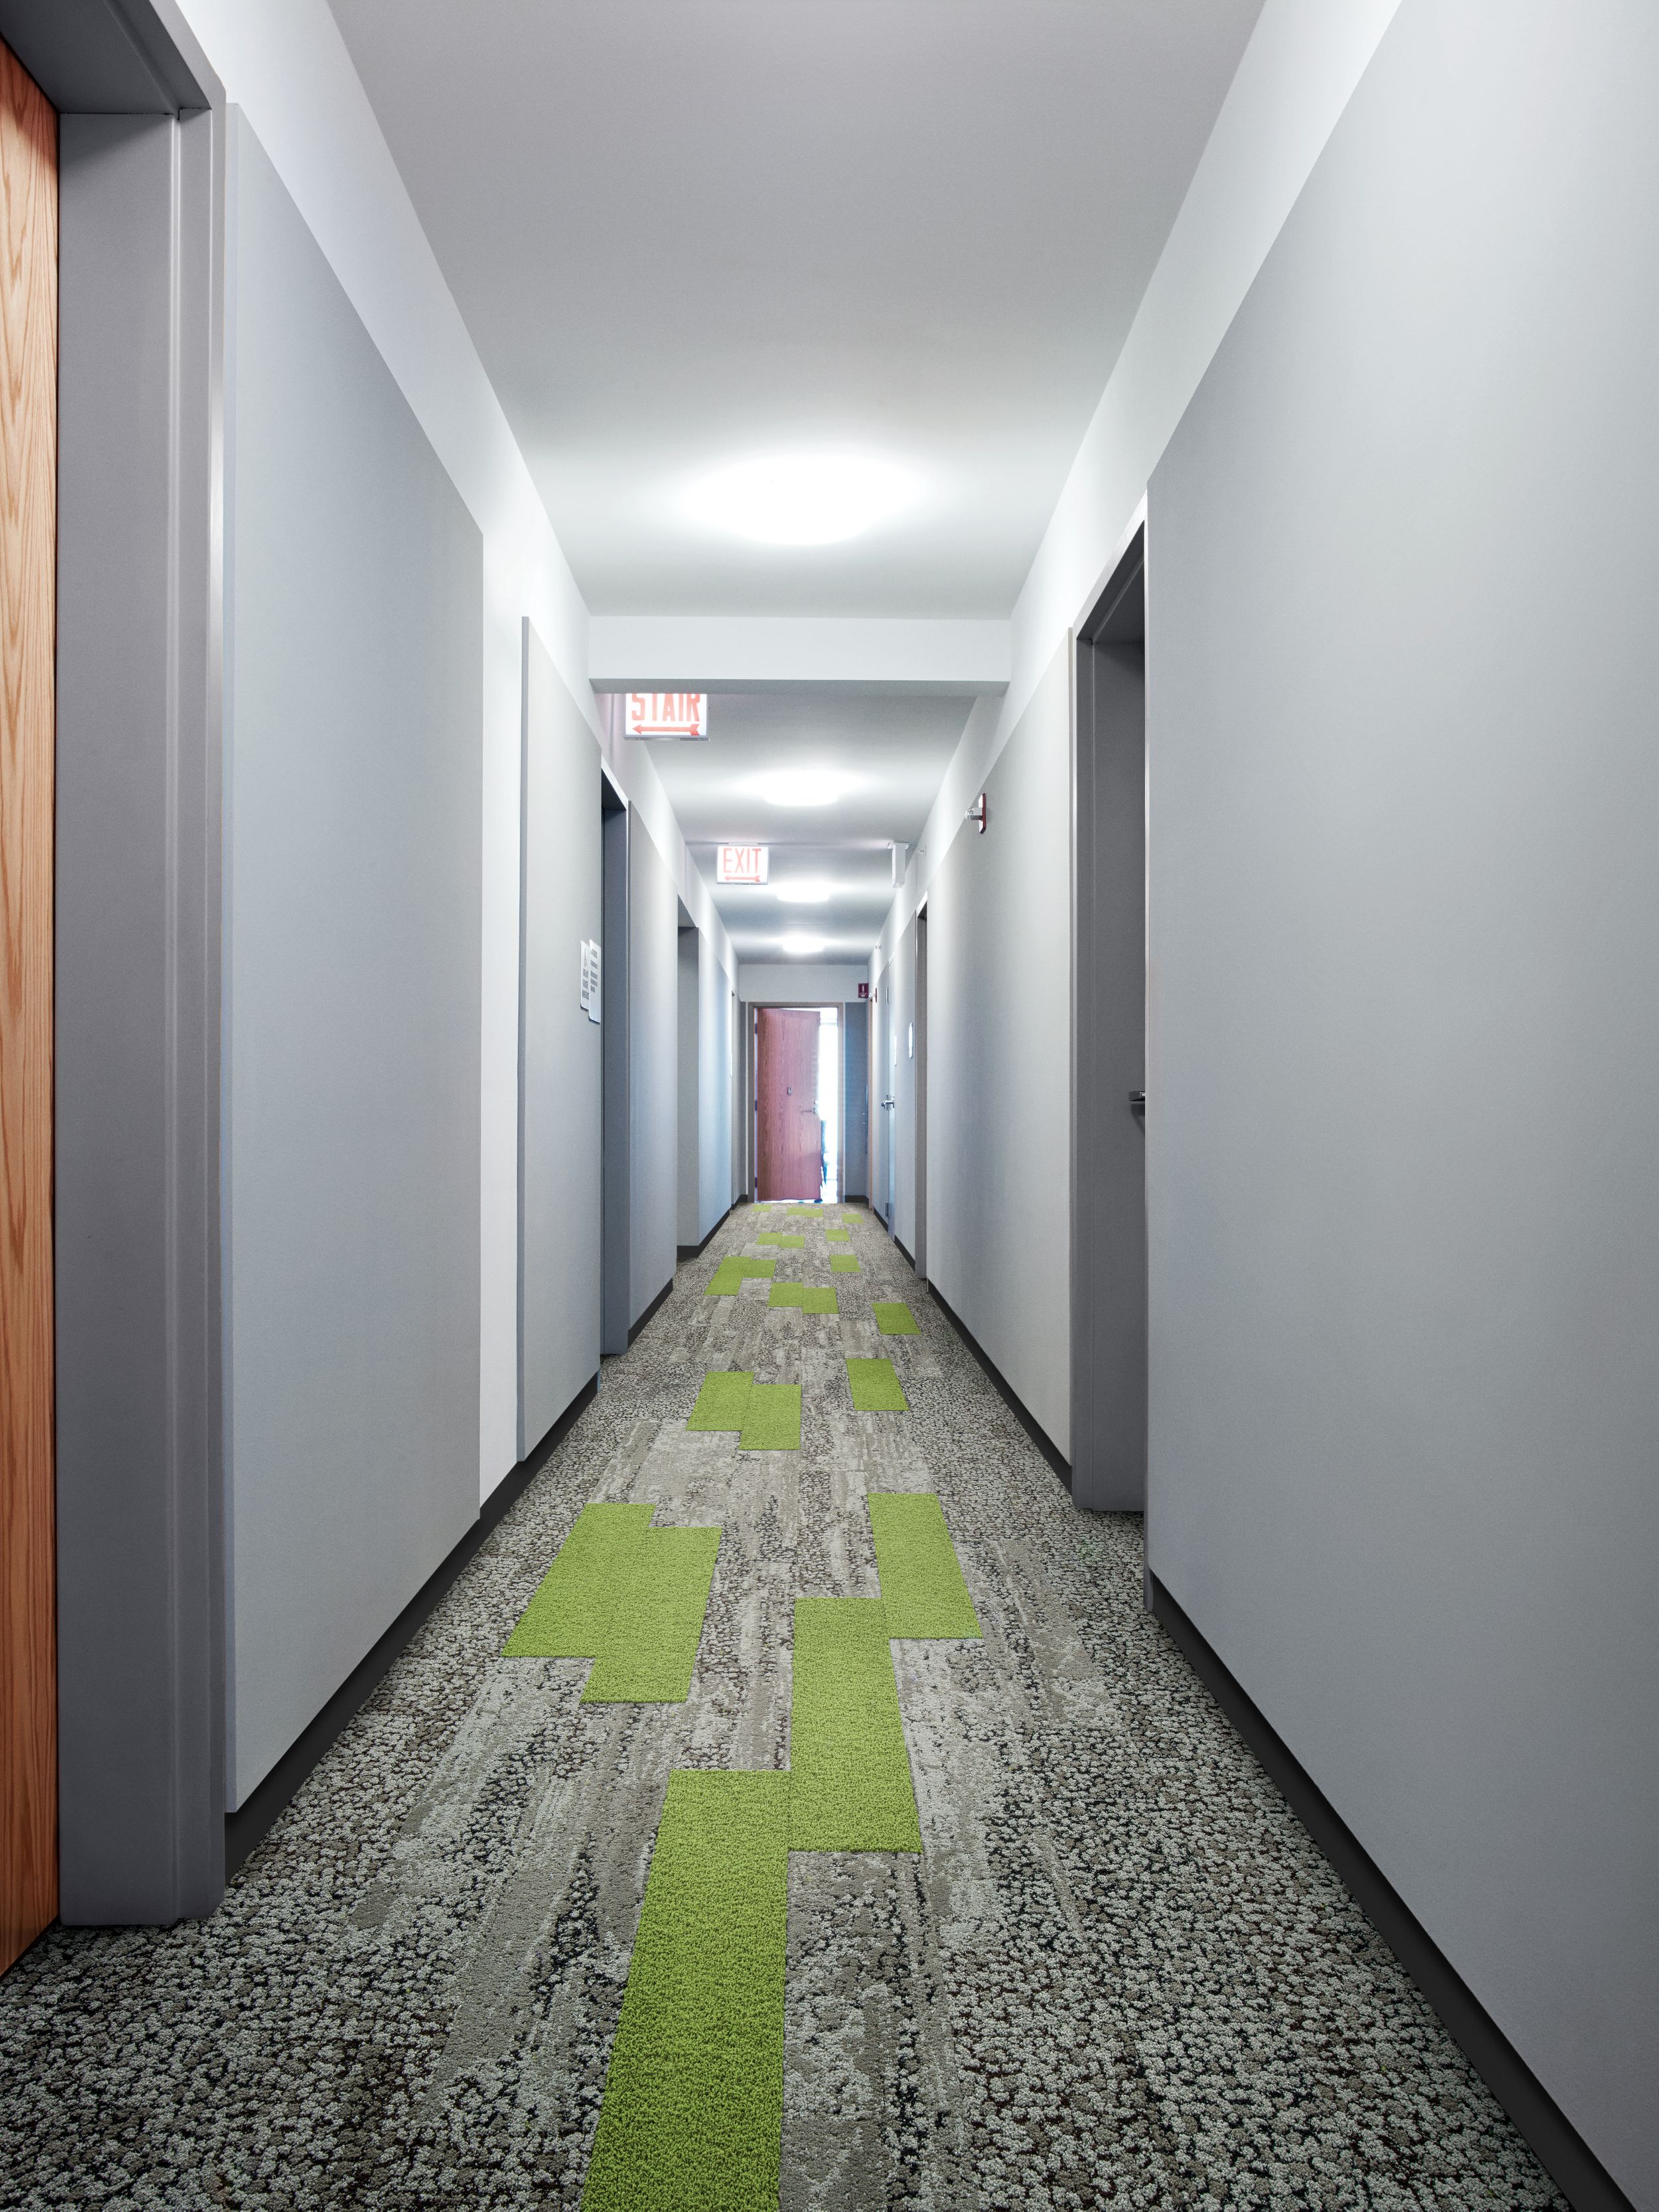 Interface HN830 and HN850 plank carpet tiles in long corridor with mutliple doors and wood door at end image number 7